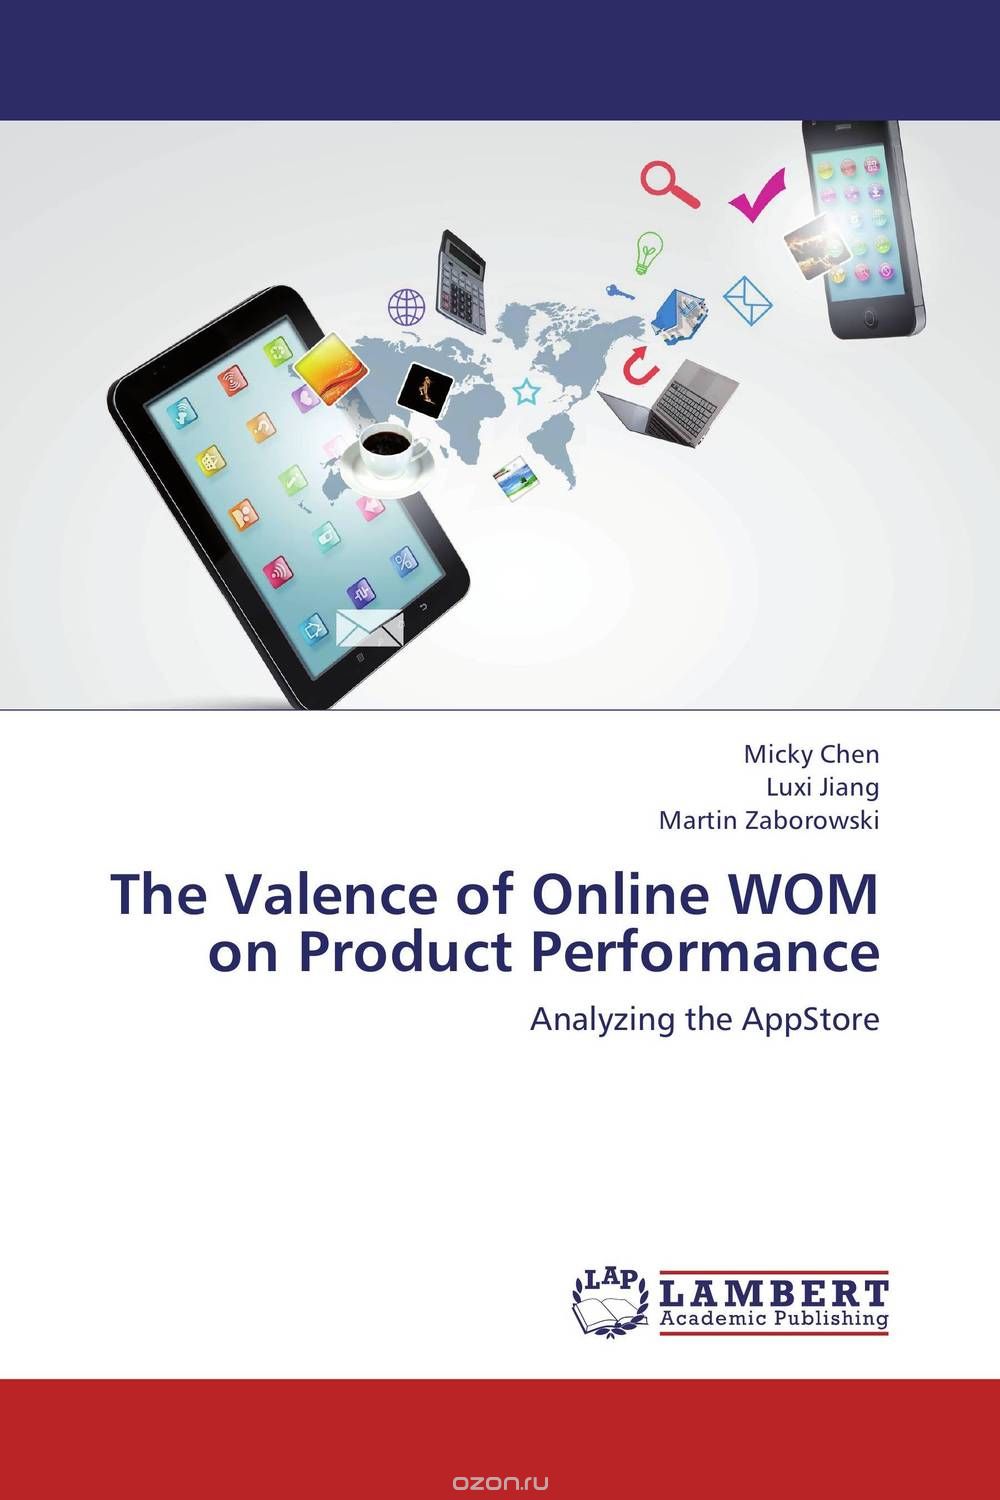 The Valence of Online WOM on Product Performance